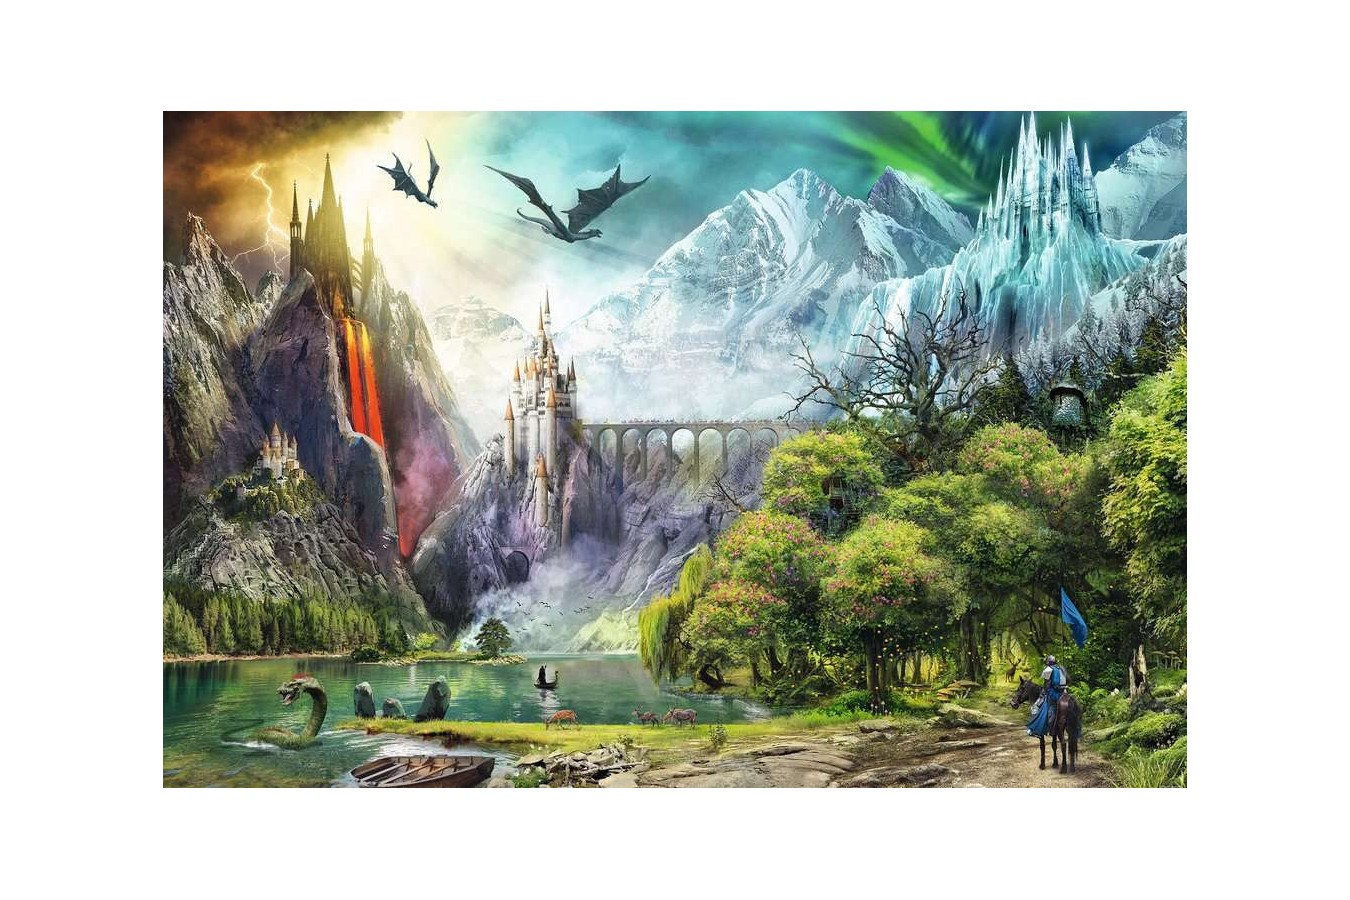 Puzzle Ravensburger - Reign of Dragons, 3000 piese (16462)